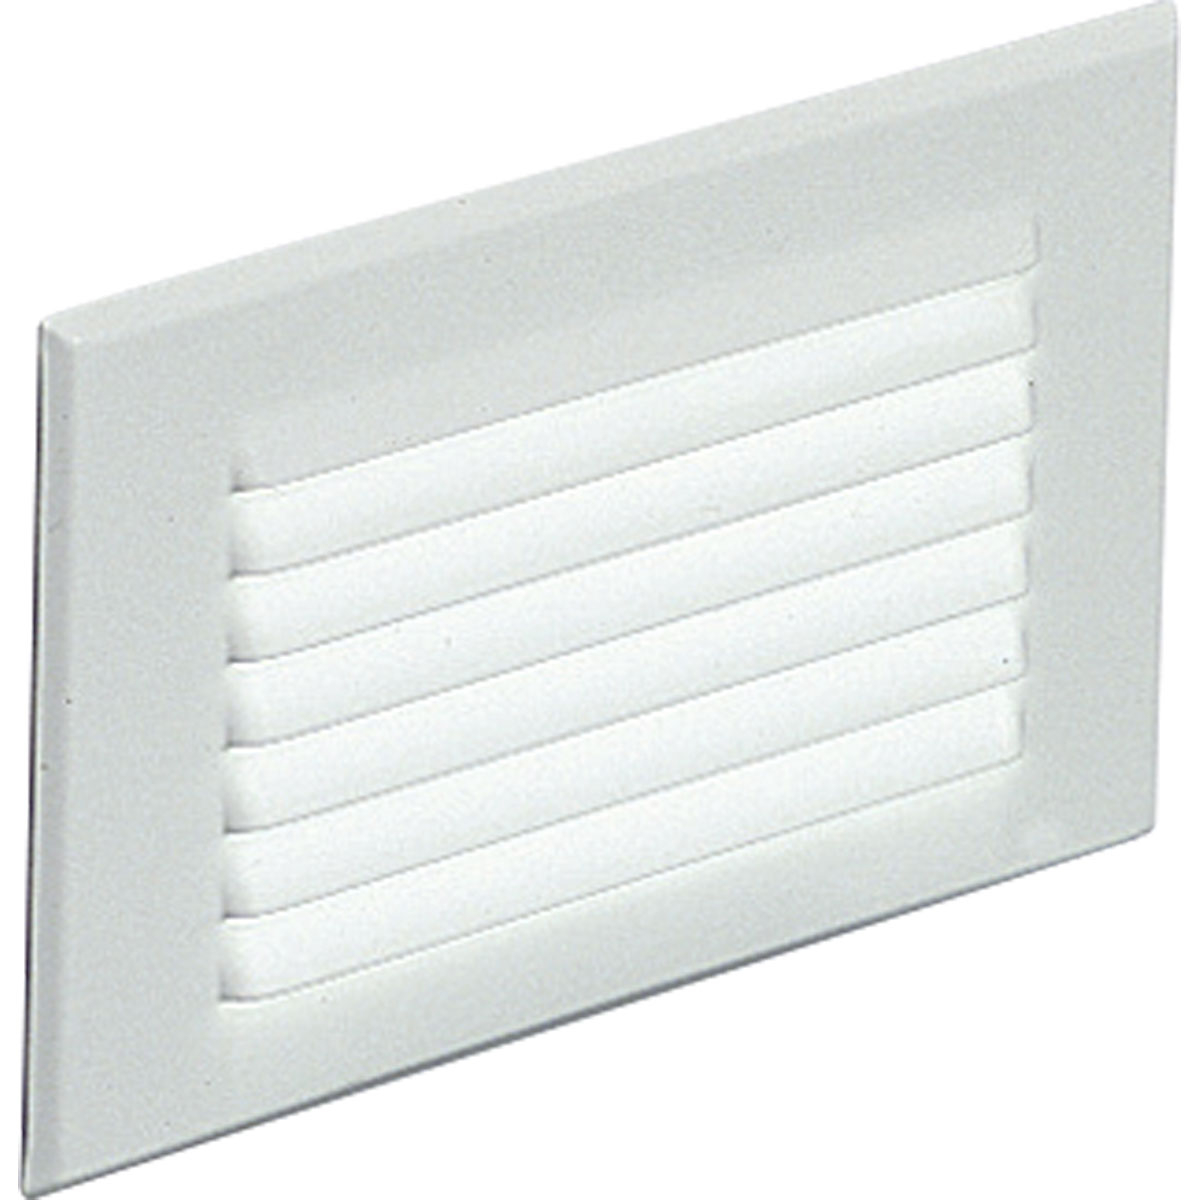 Spring-held white louver faceplate. Metal housing has 1/2 in I.P. conduit entry. For indoor and protected outdoor use. Therma-Gard protection. Porcelain socket.